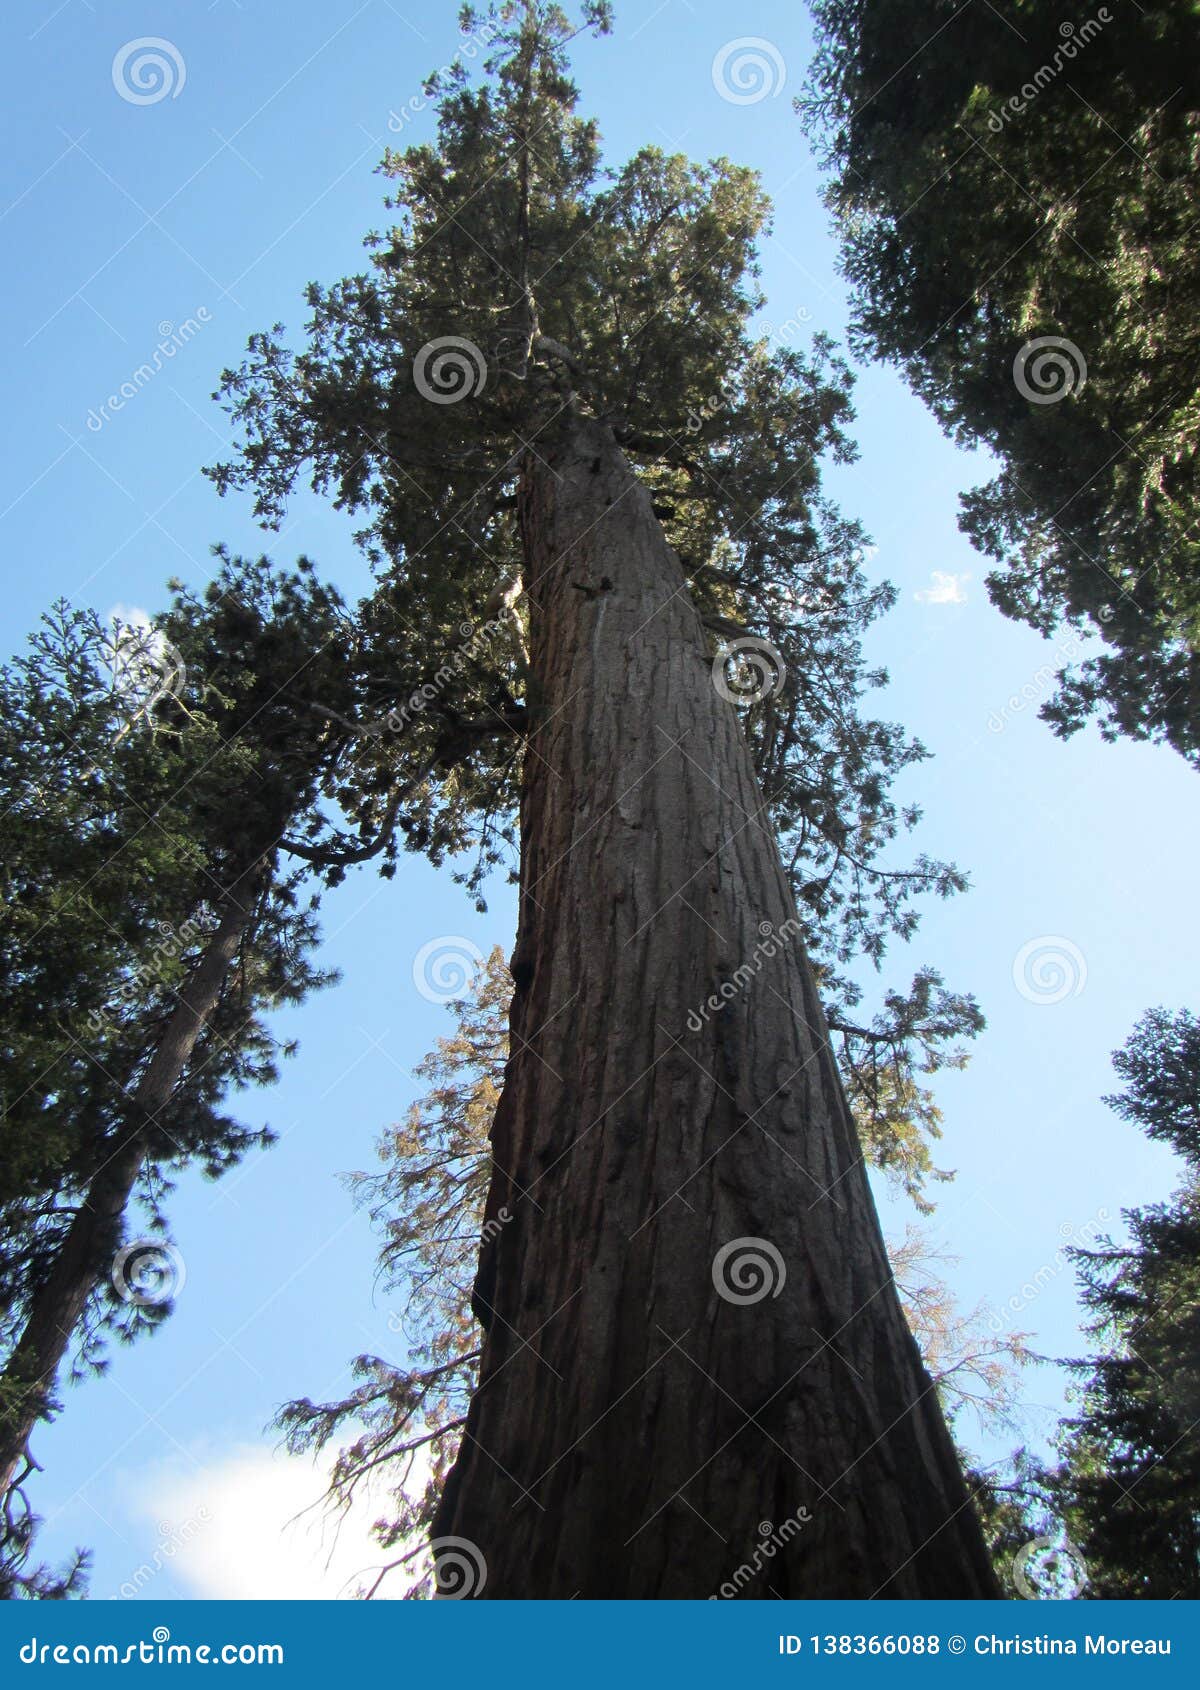 giant sequoia sequoiadendron giganteum view looking up trunk from ground